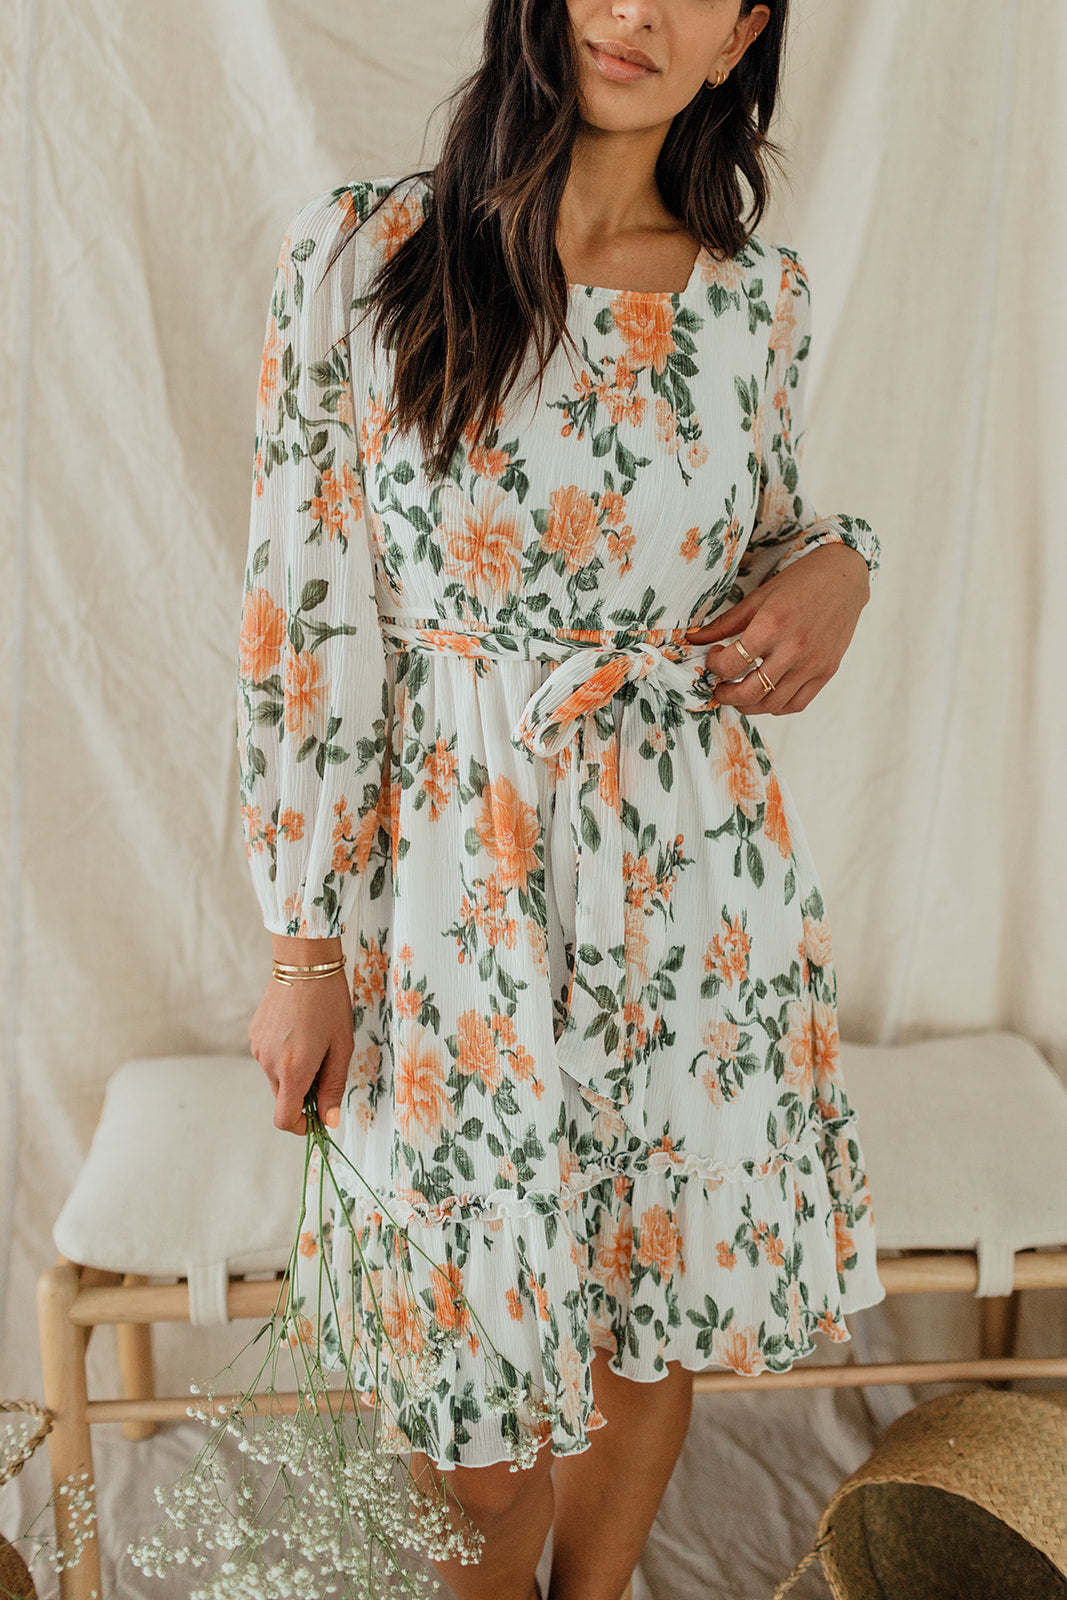 Floral Dress Outfit Ideas - Back To School Outfit Ideas - Affordable  Clothing Boutique in Utah | ROOLEE | Floral dress outfits, Classy outfits,  Fashion outfits